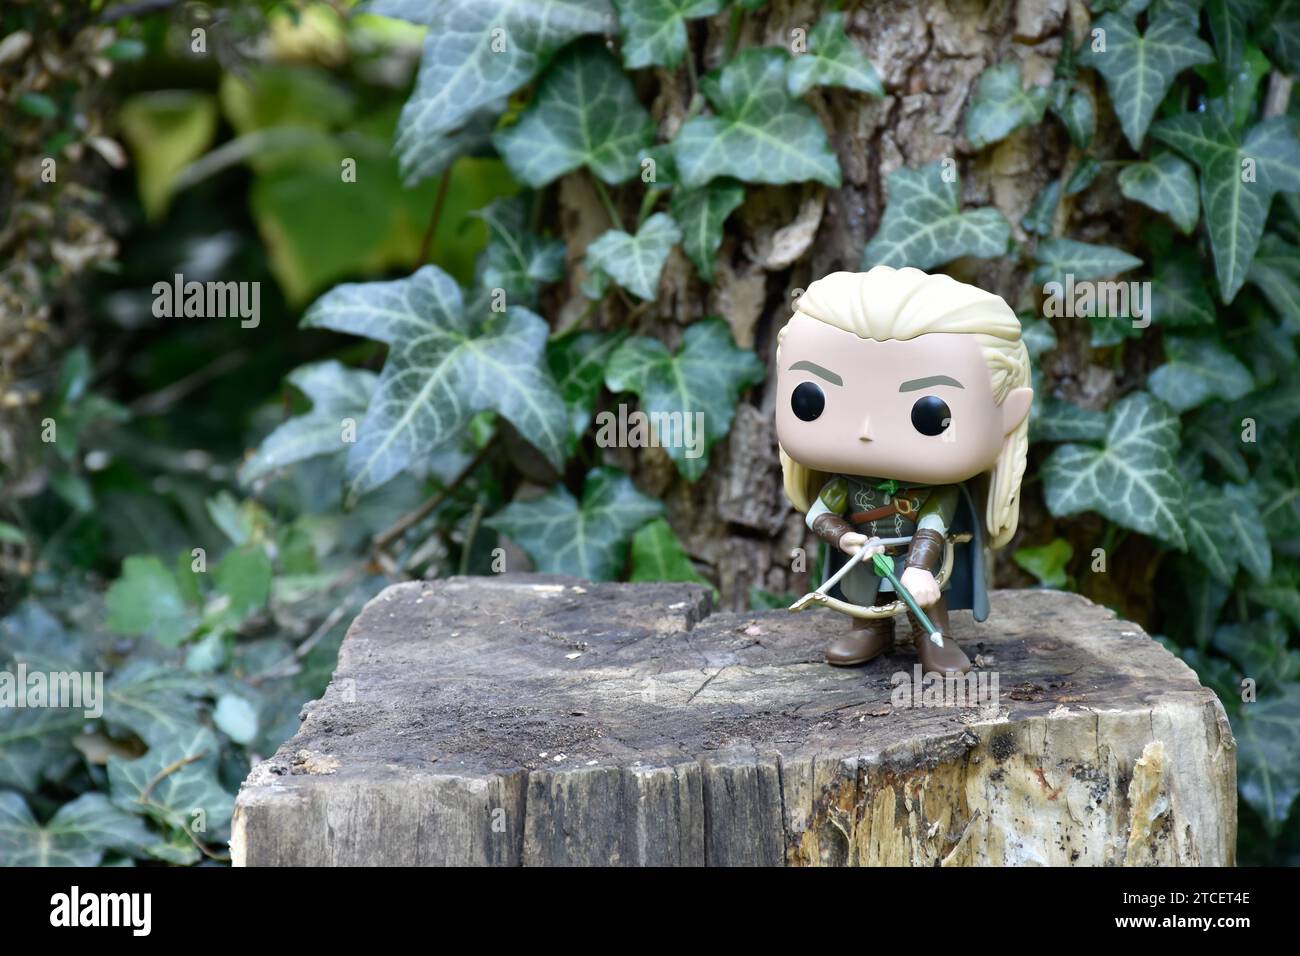 Funko Pop action figure of elf Legolas from fantasy movie The Lord of the Rings. Warrior holding bow and arrow. Forest tree, green ivy leaves. Stock Photo